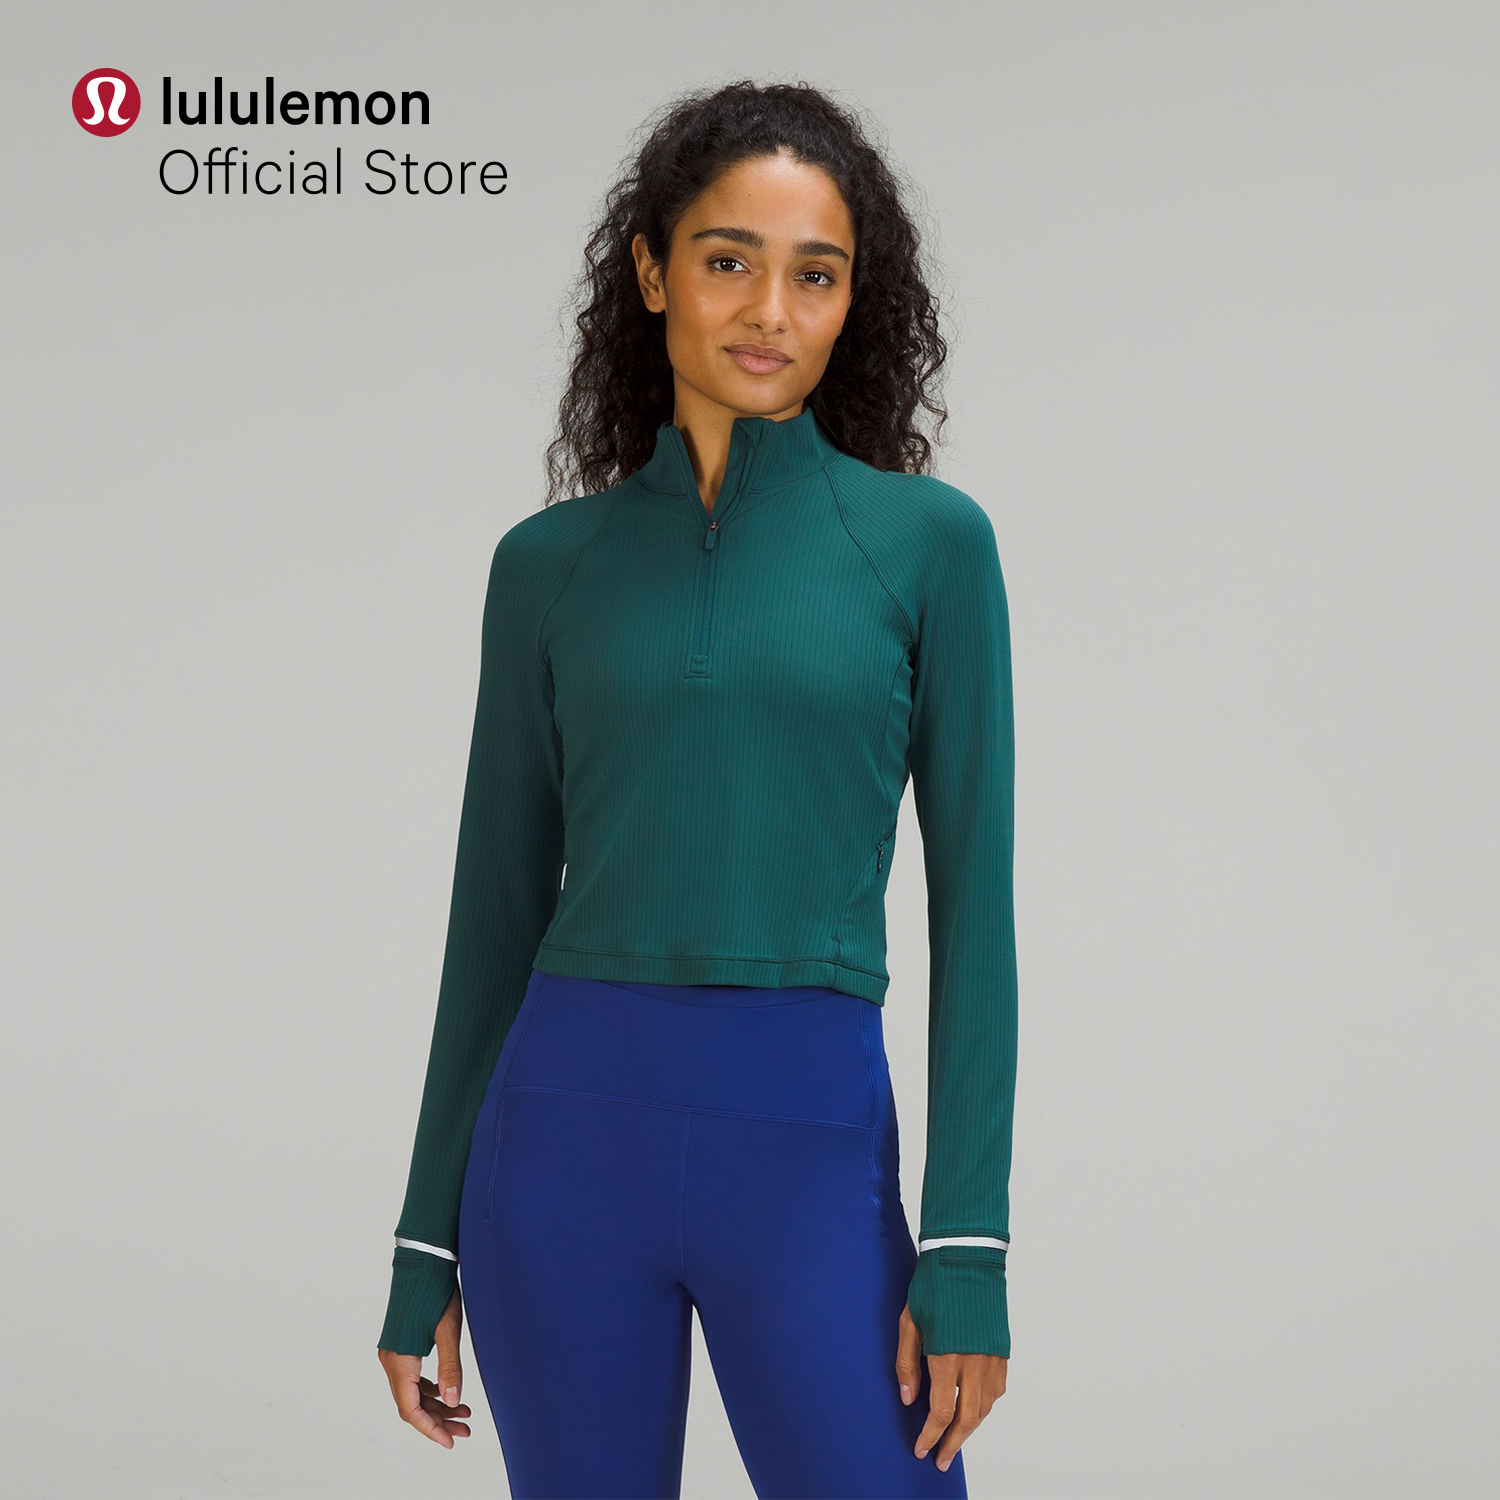 Dupe for the Lululemon (It's Rulu Run Cropped half Zip) not the